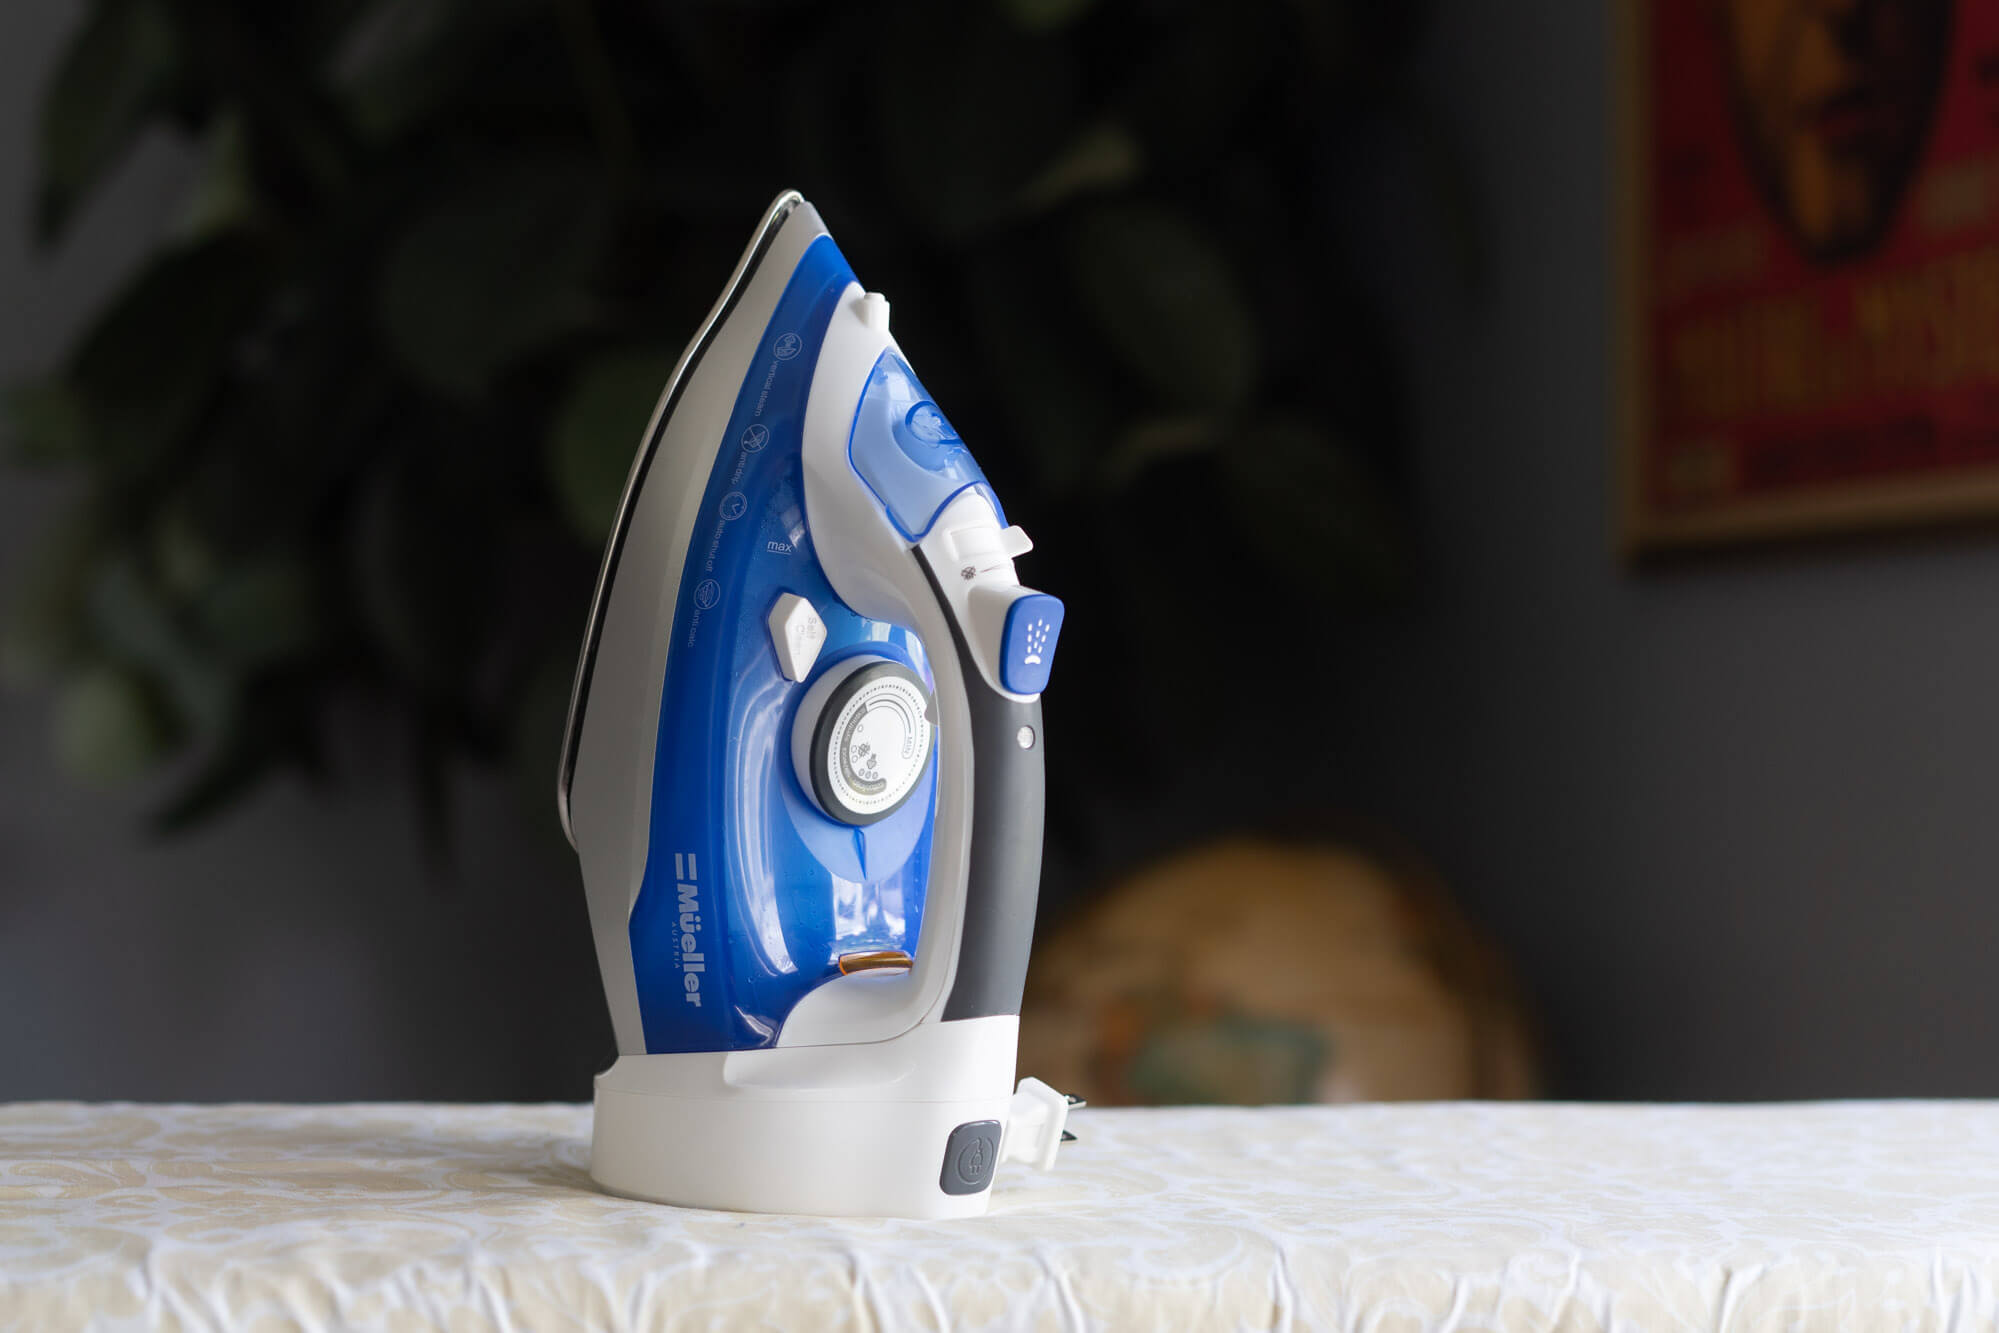 Irons + Steamers, Garment Care, Easy Steam Compact Iron